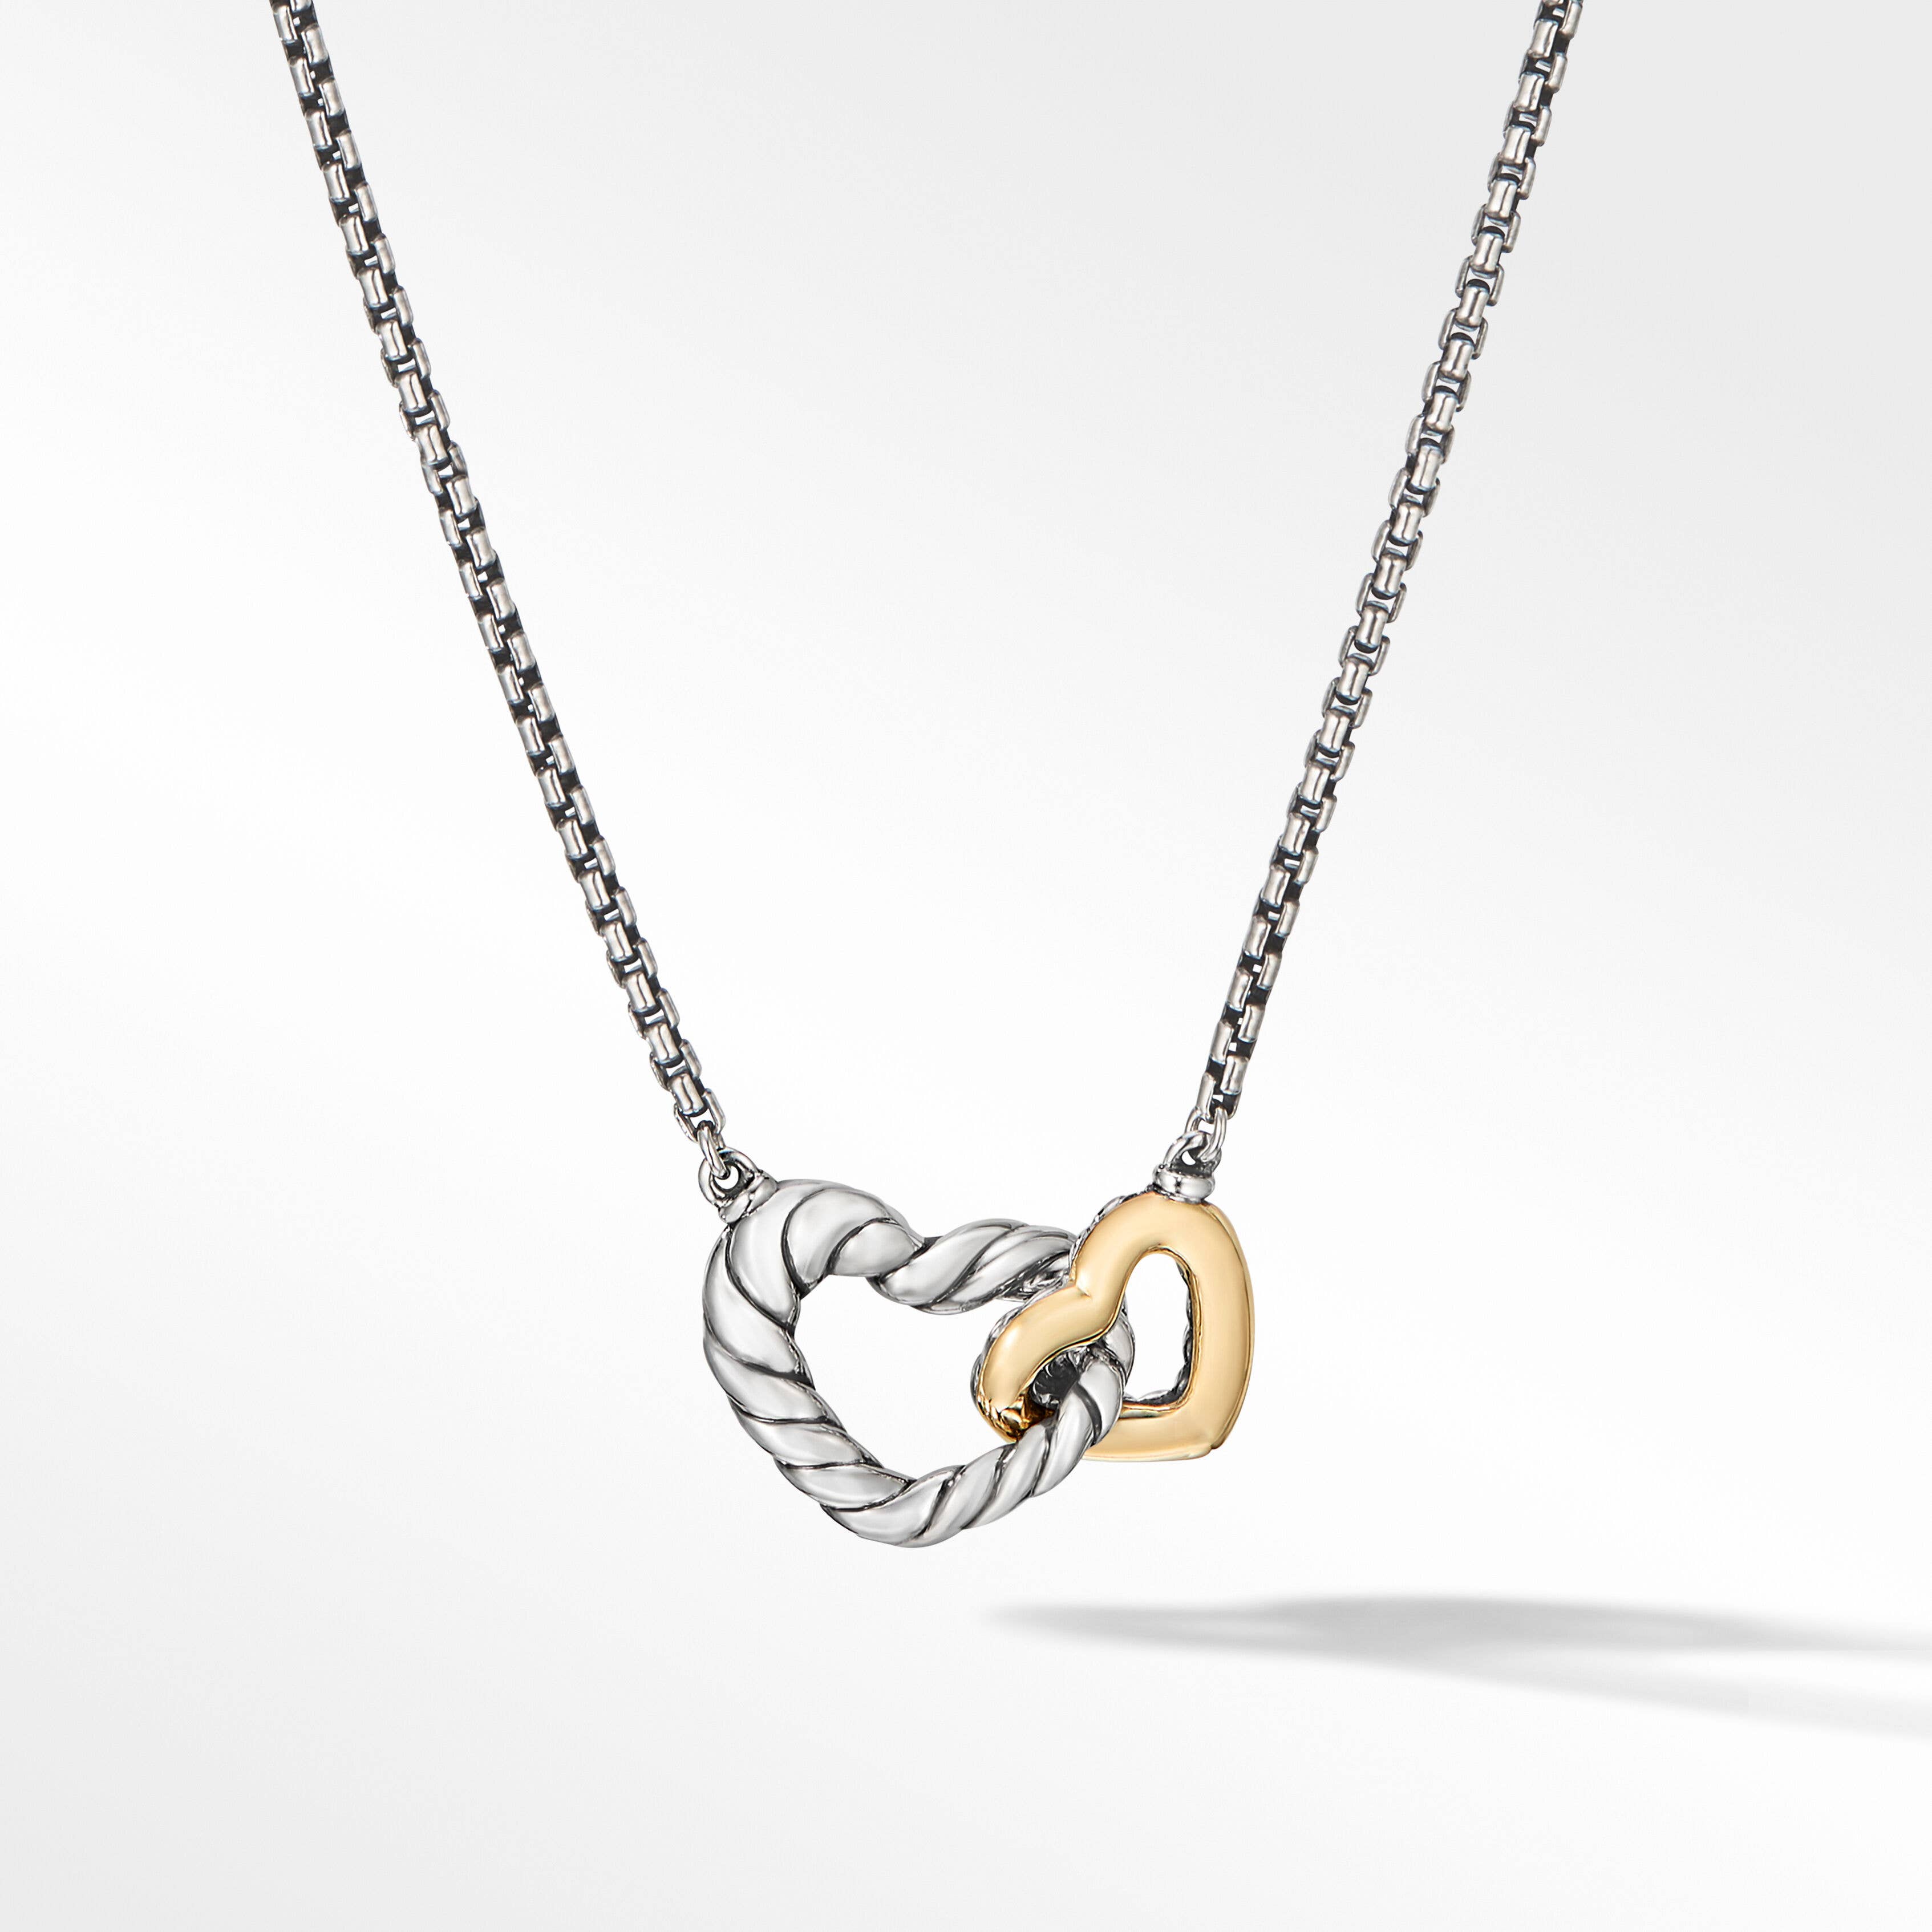 Cable Collectibles® Interlocking Heart Necklace in Sterling Silver with 18K Yellow Gold